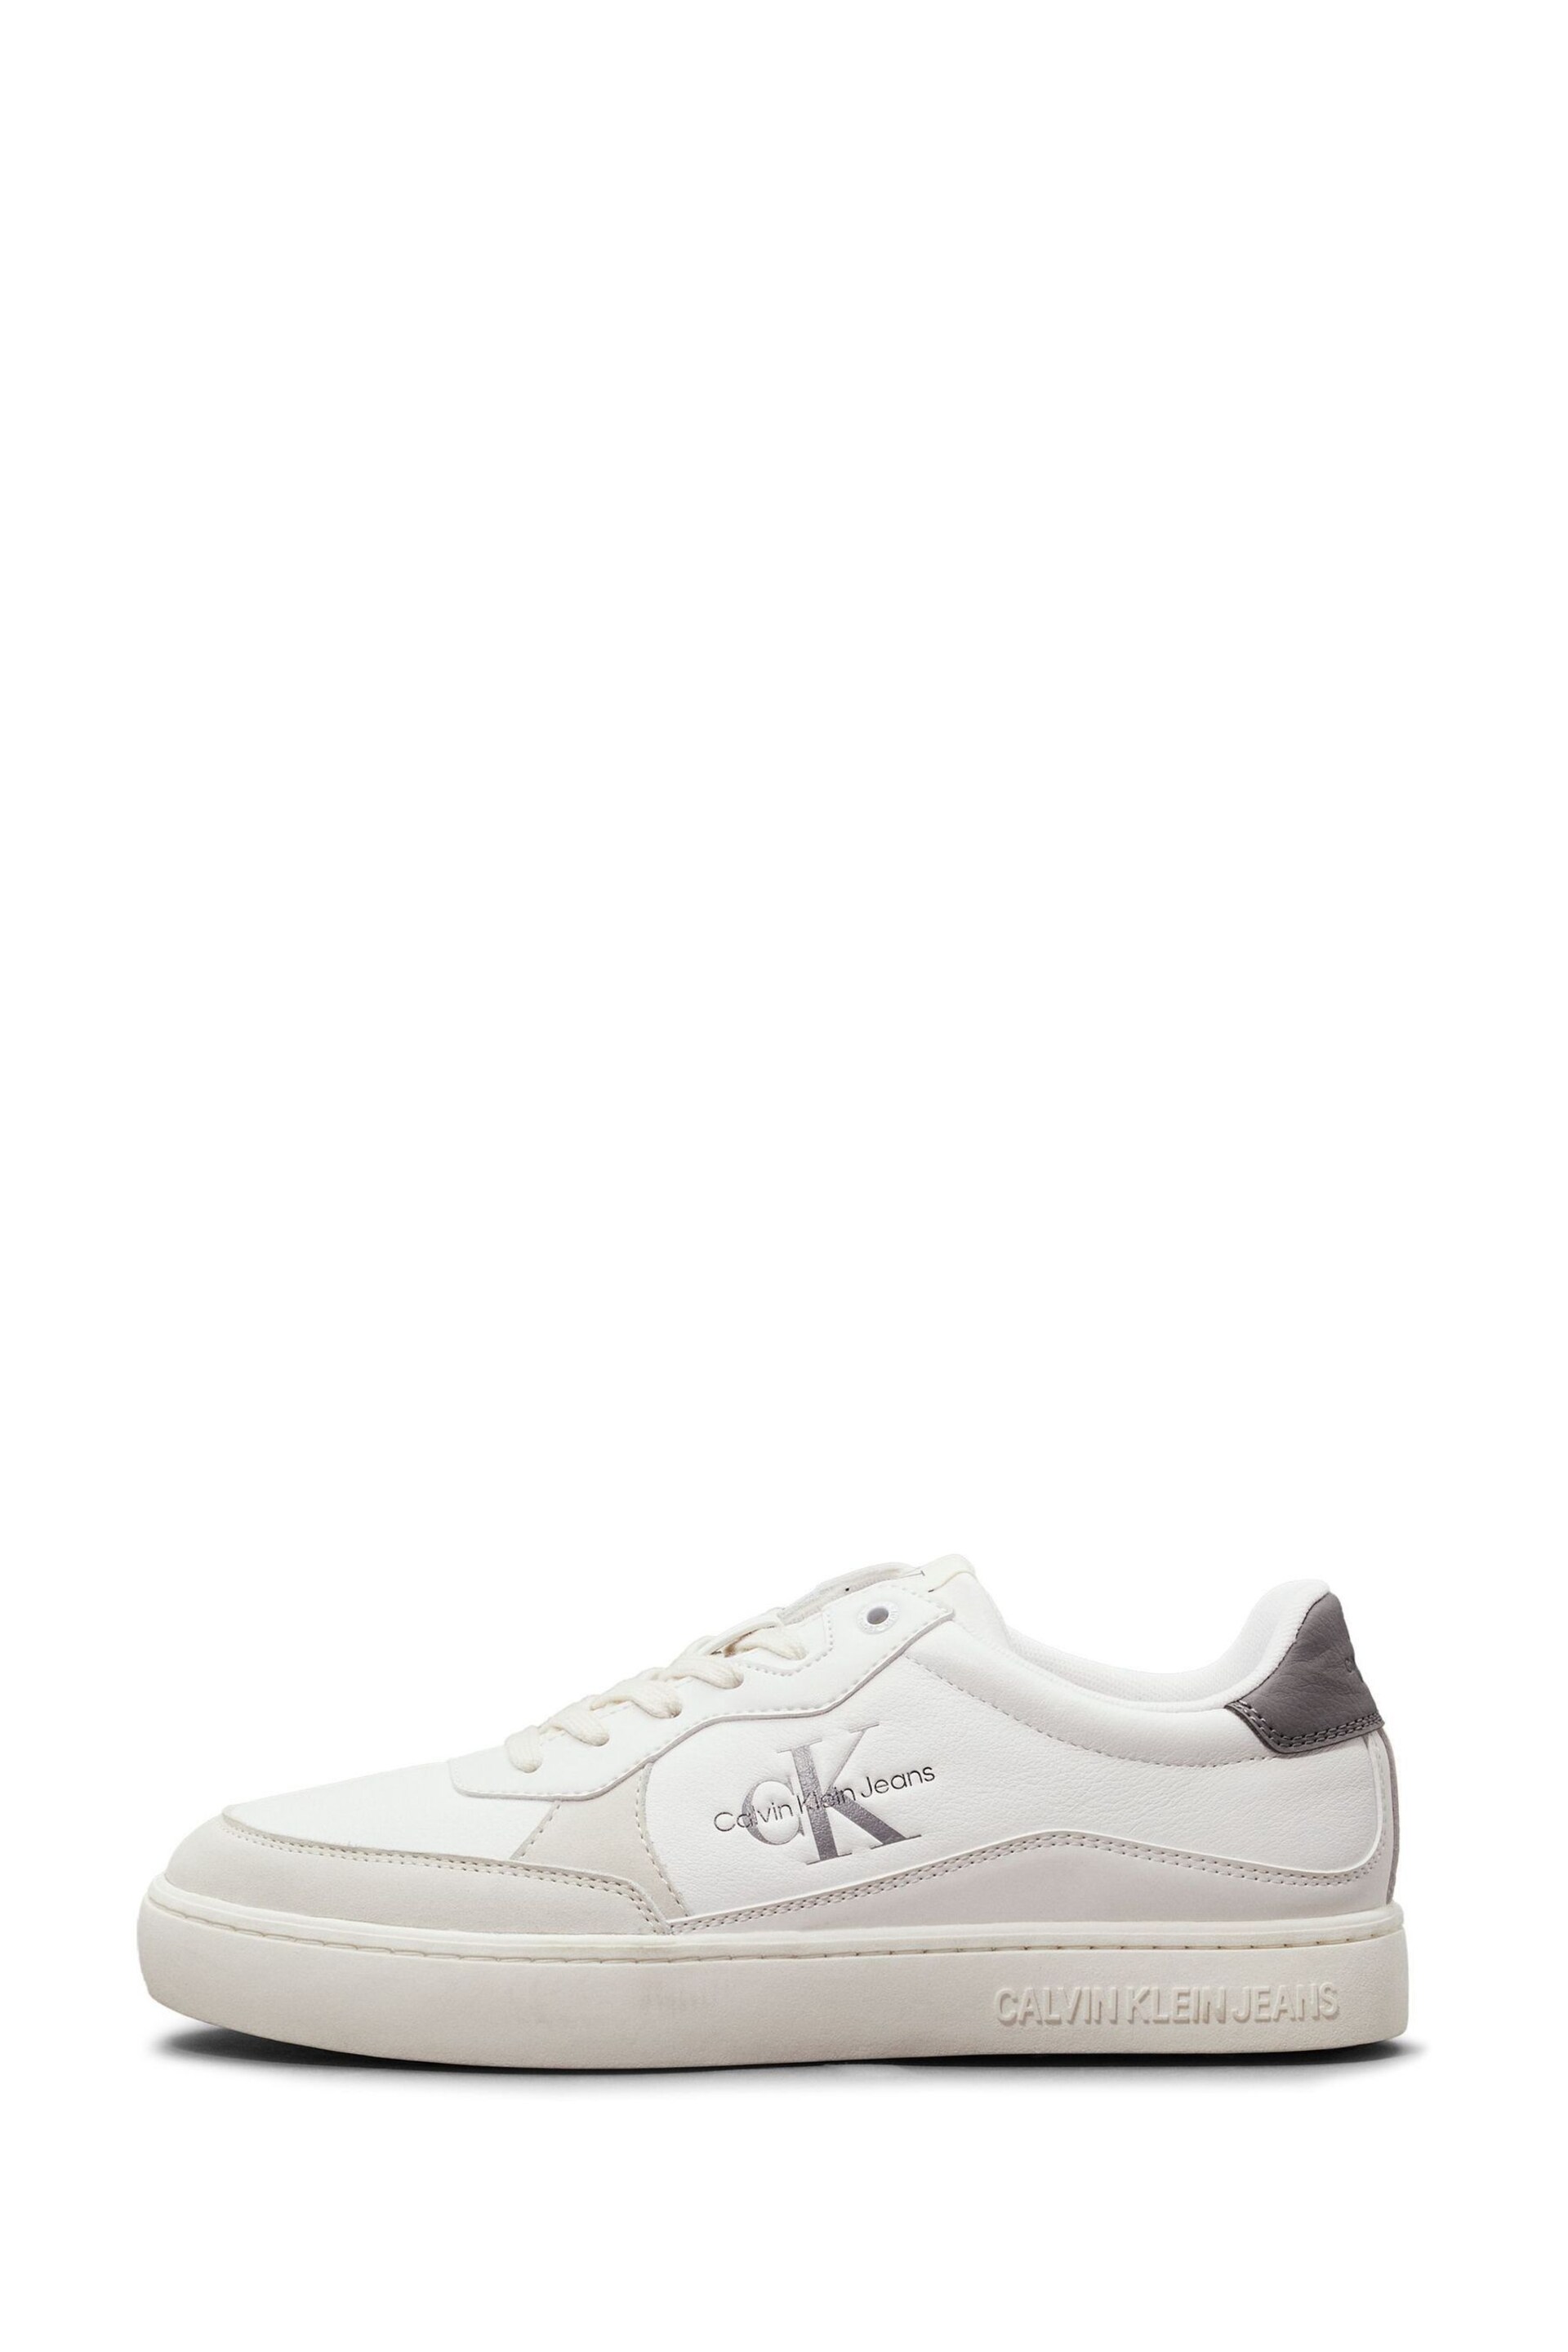 Calvin Klein Grey Classic Cupsole Low Lace-Up Trainers - Image 2 of 5